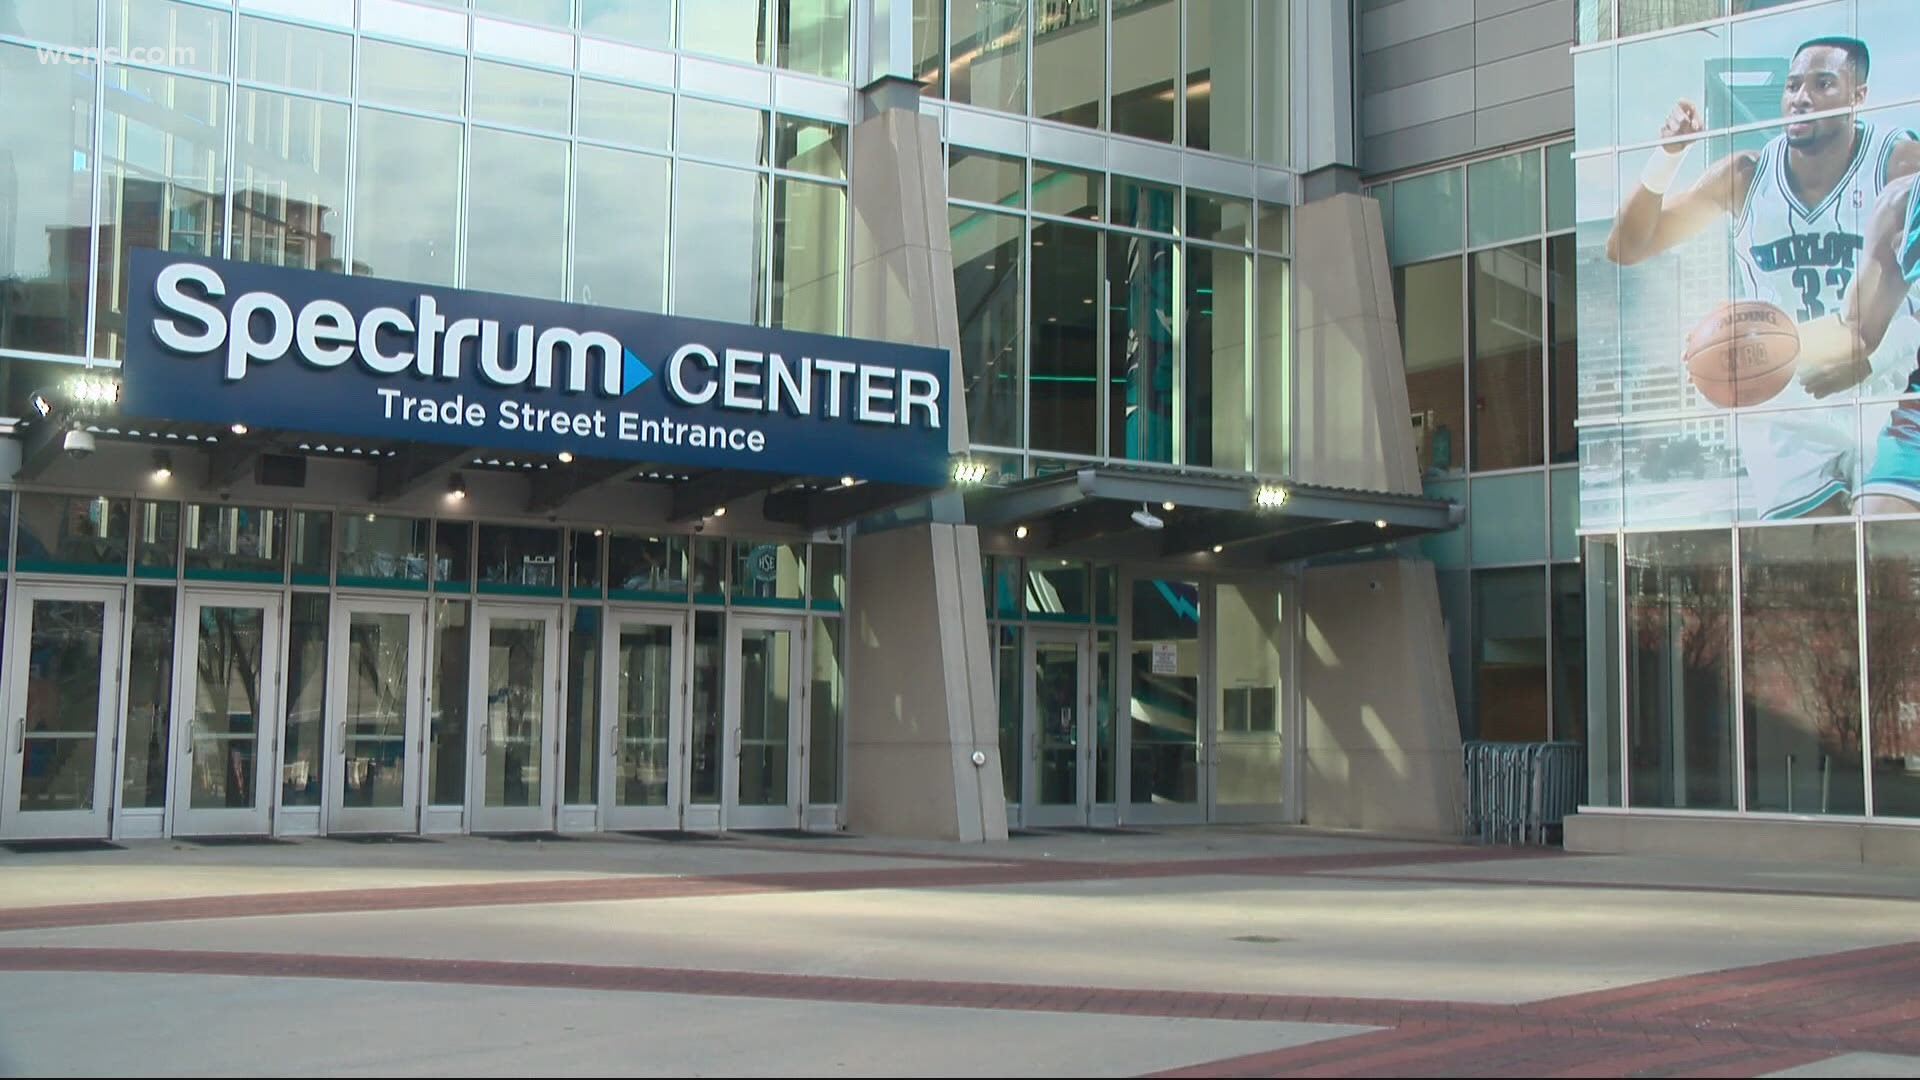 The game will be held Thursday night at the Spectrum Center.